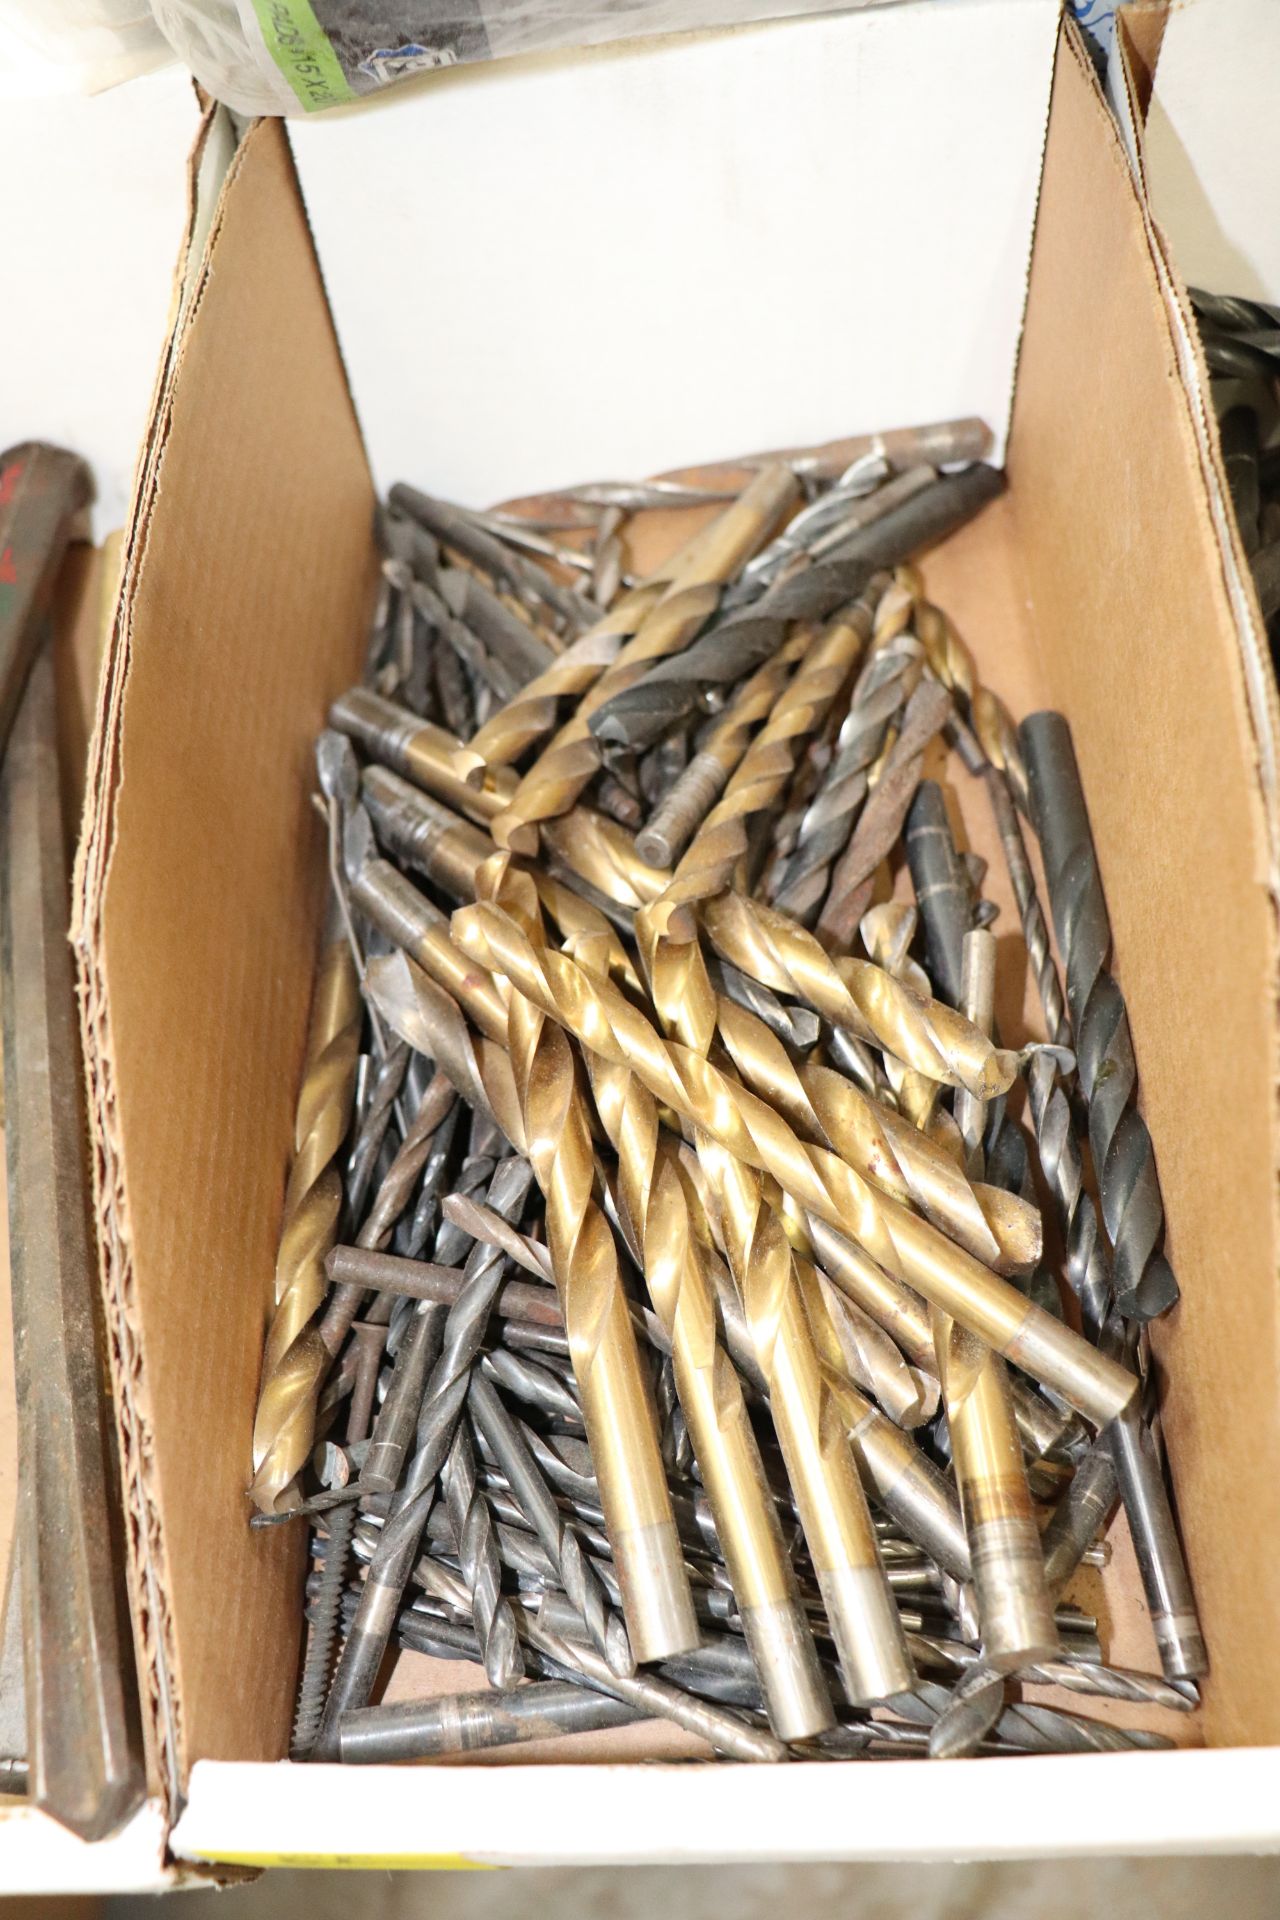 Drill bits - Image 2 of 2